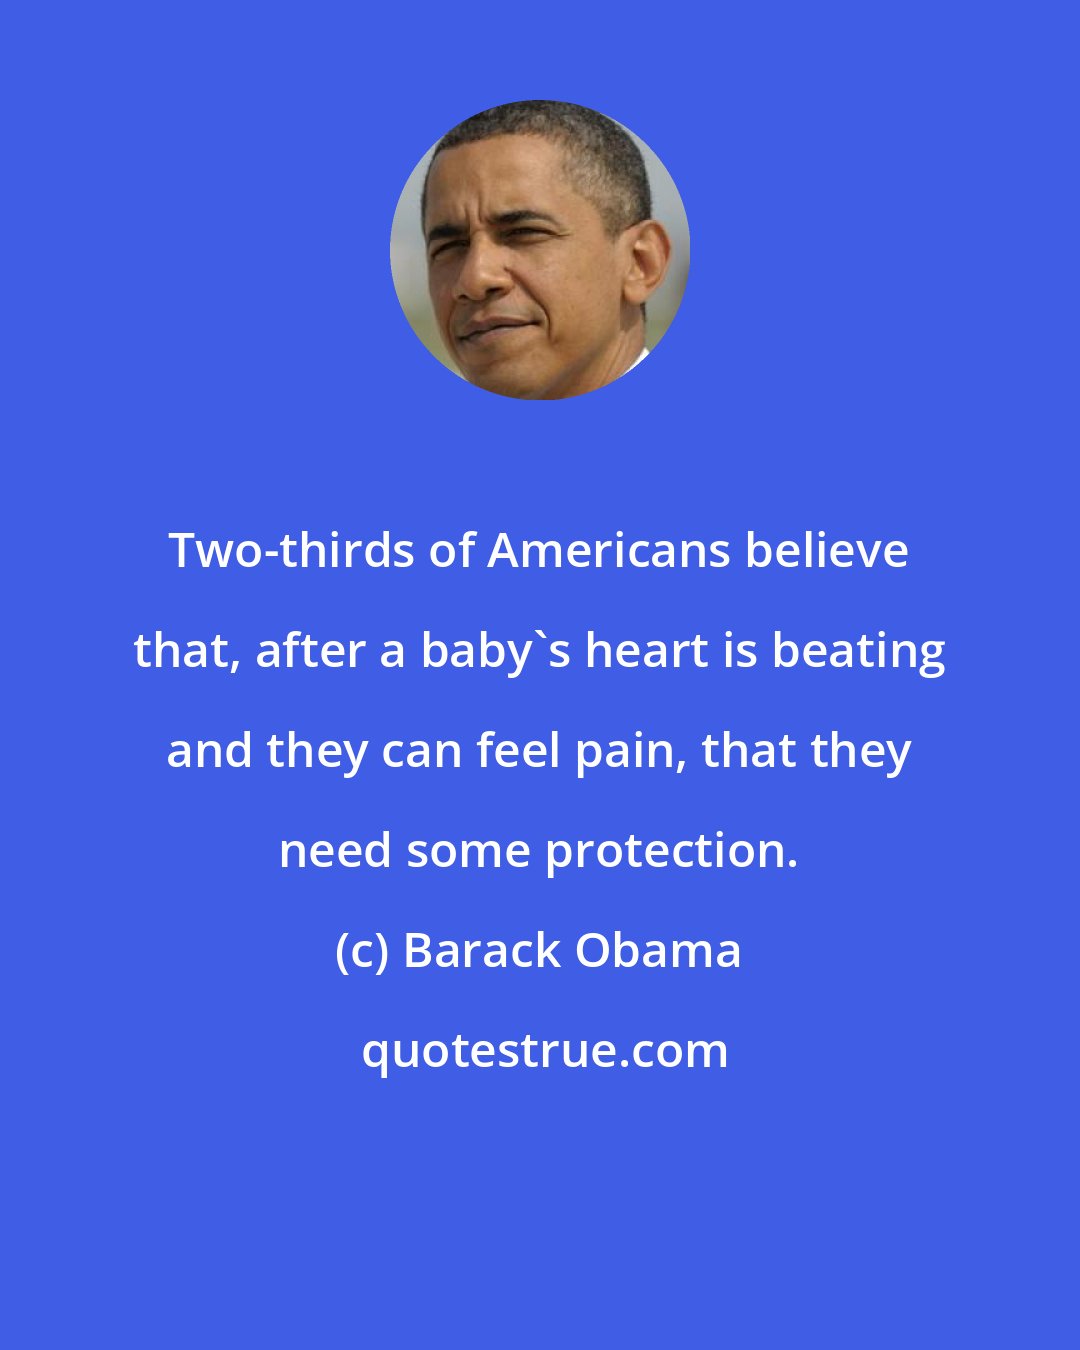 Barack Obama: Two-thirds of Americans believe that, after a baby's heart is beating and they can feel pain, that they need some protection.